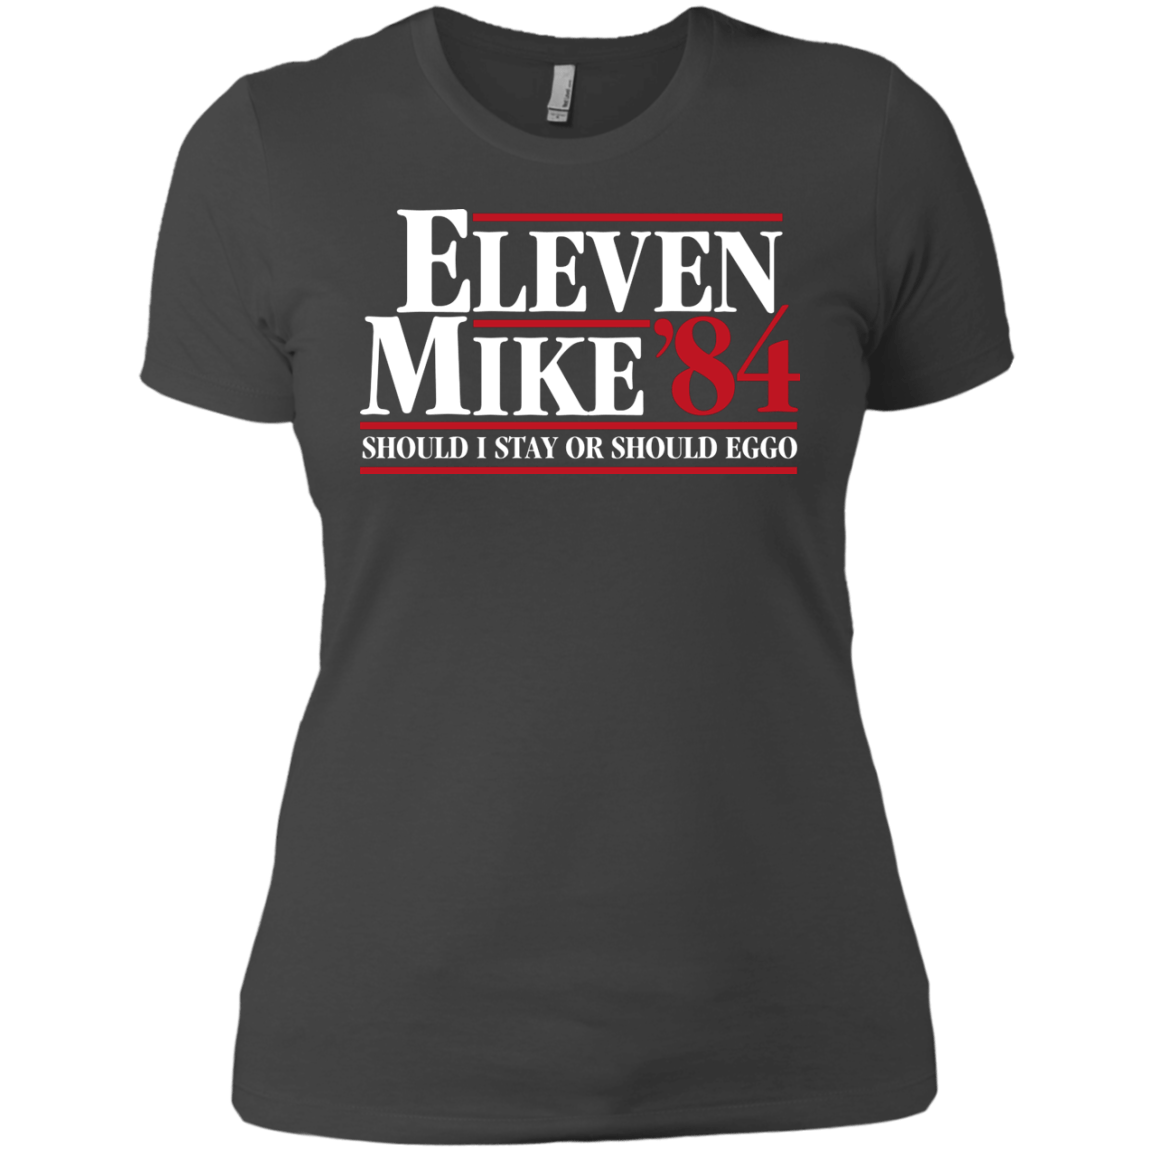 T-Shirts Heavy Metal / X-Small Eleven Mike 84 - Should I Stay or Should Eggo Women's Premium T-Shirt